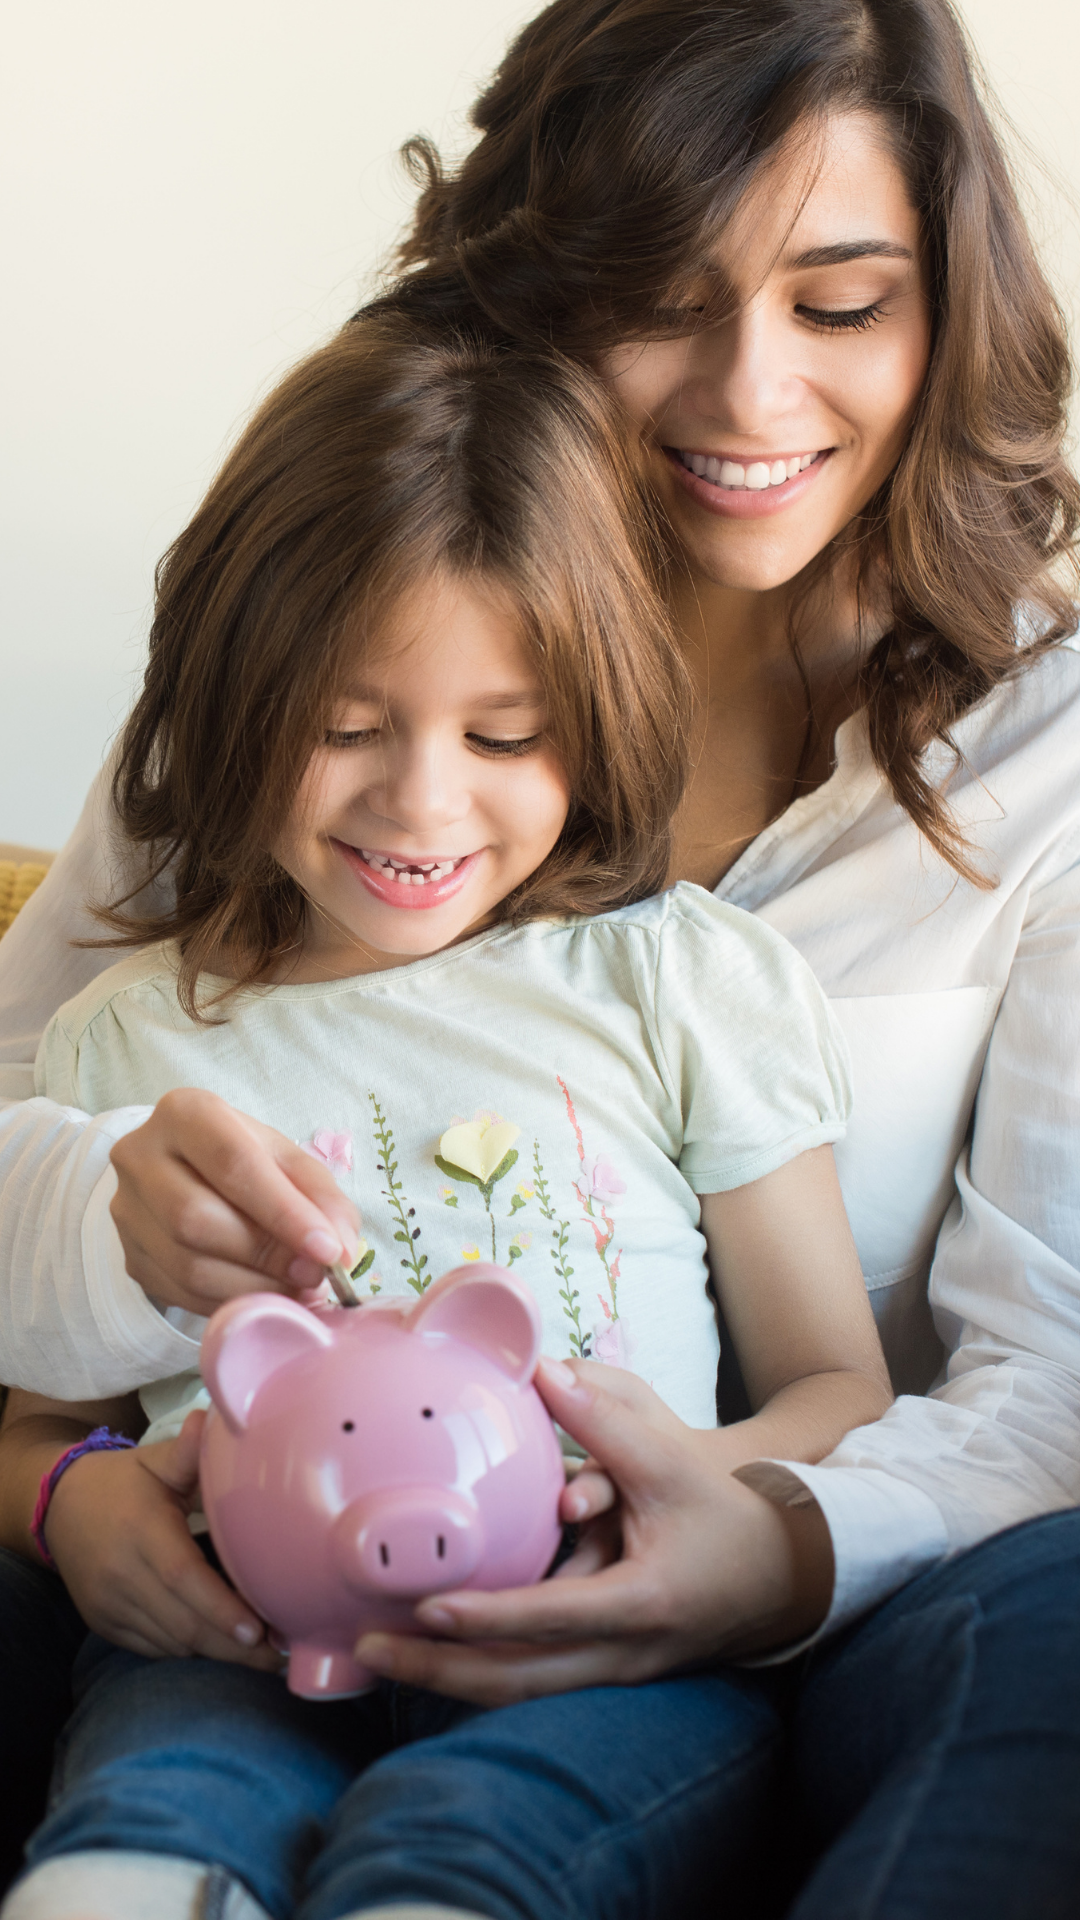 Educating Children About Money - When Is The Right Time?